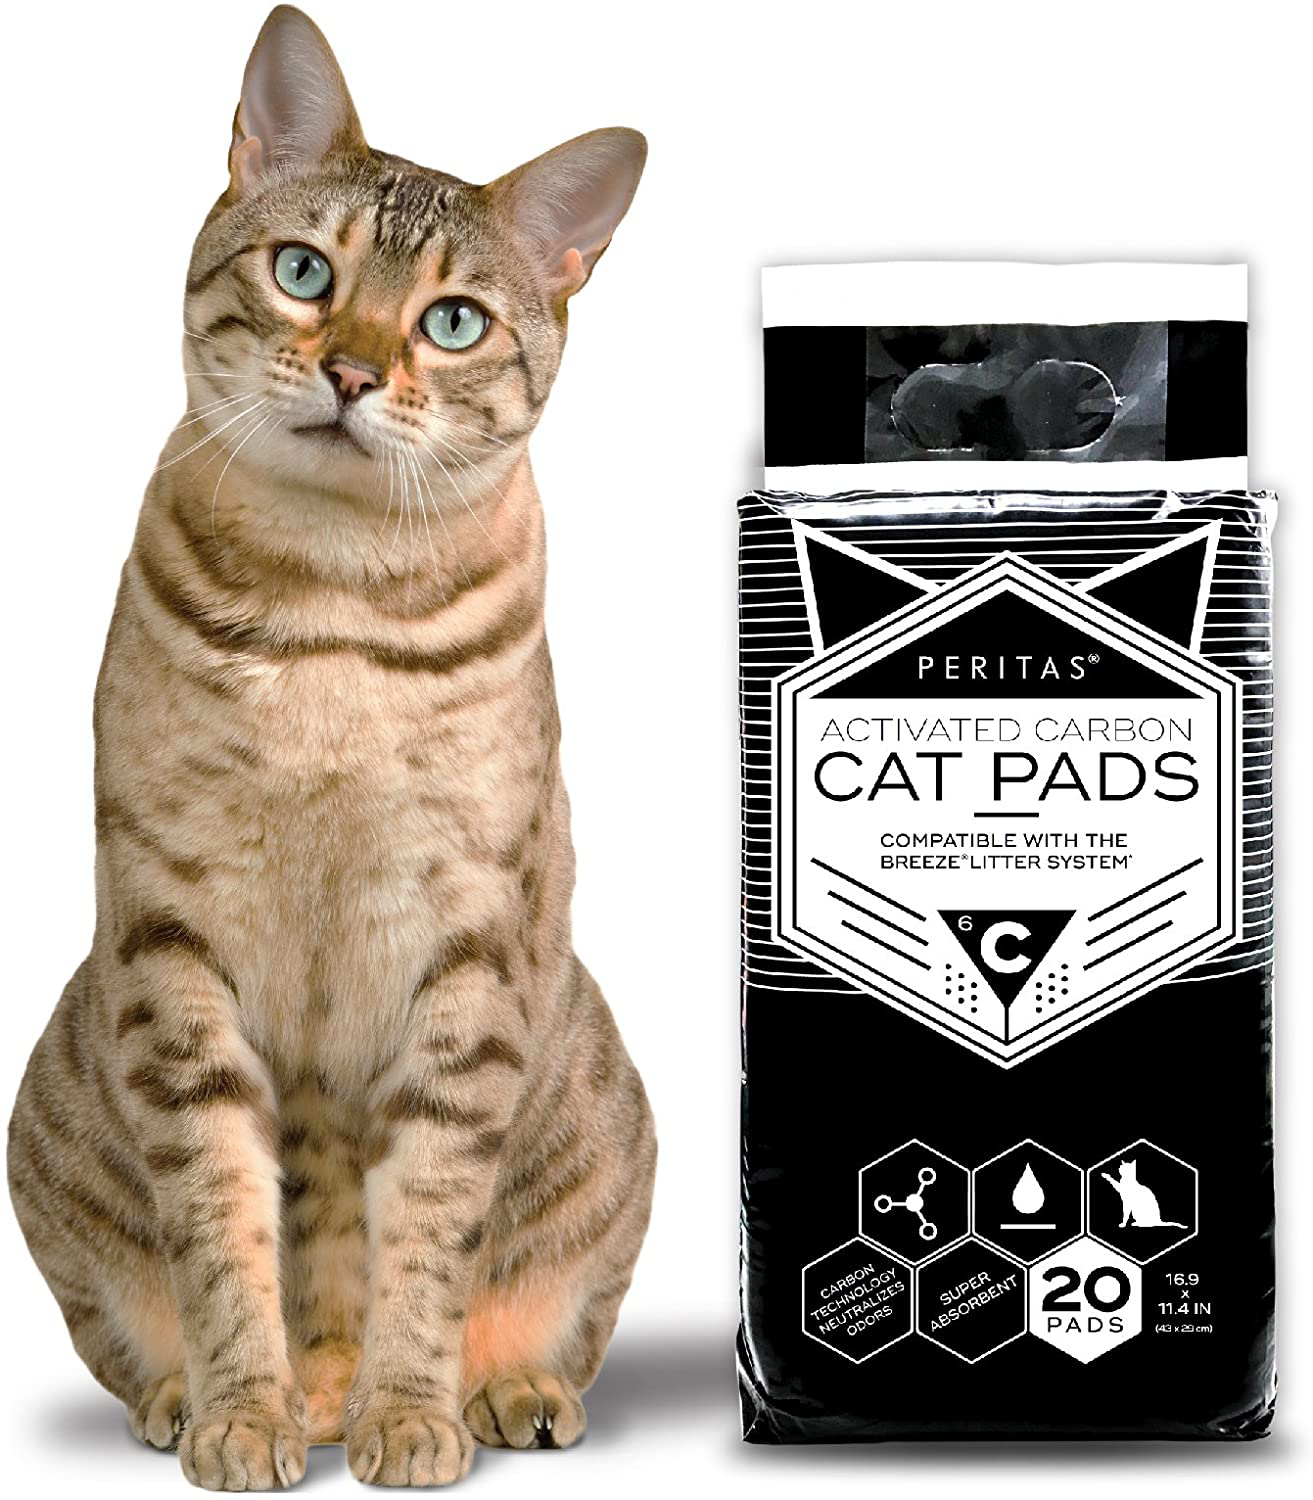 Peritas Cat Pads | Generic Refill for Breeze Tidy Cat Litter System | Cat Liner Pads for Litter Box | Quick-Dry, Super Absorbent, Leak Proof | 16.9"X11.4" (20 Count)